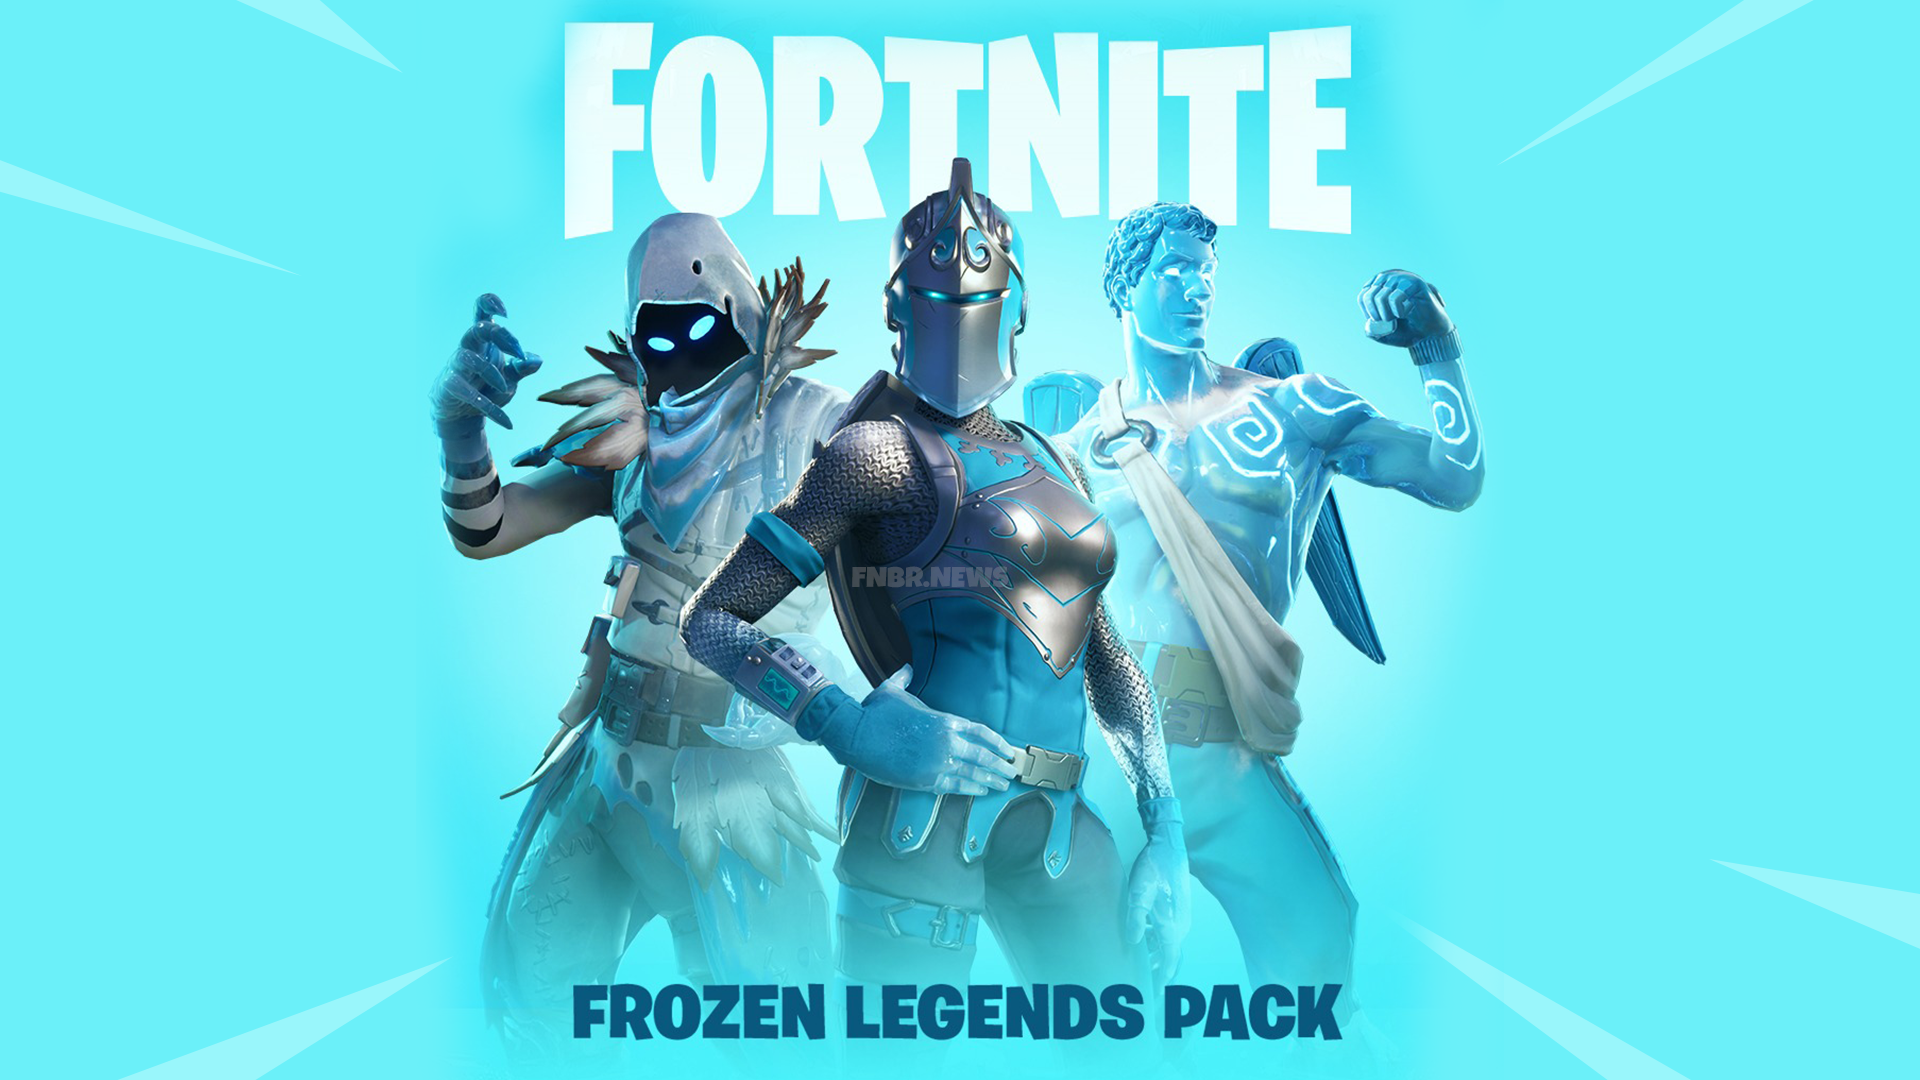 Fortnite Frozen Legends Pack Available Now